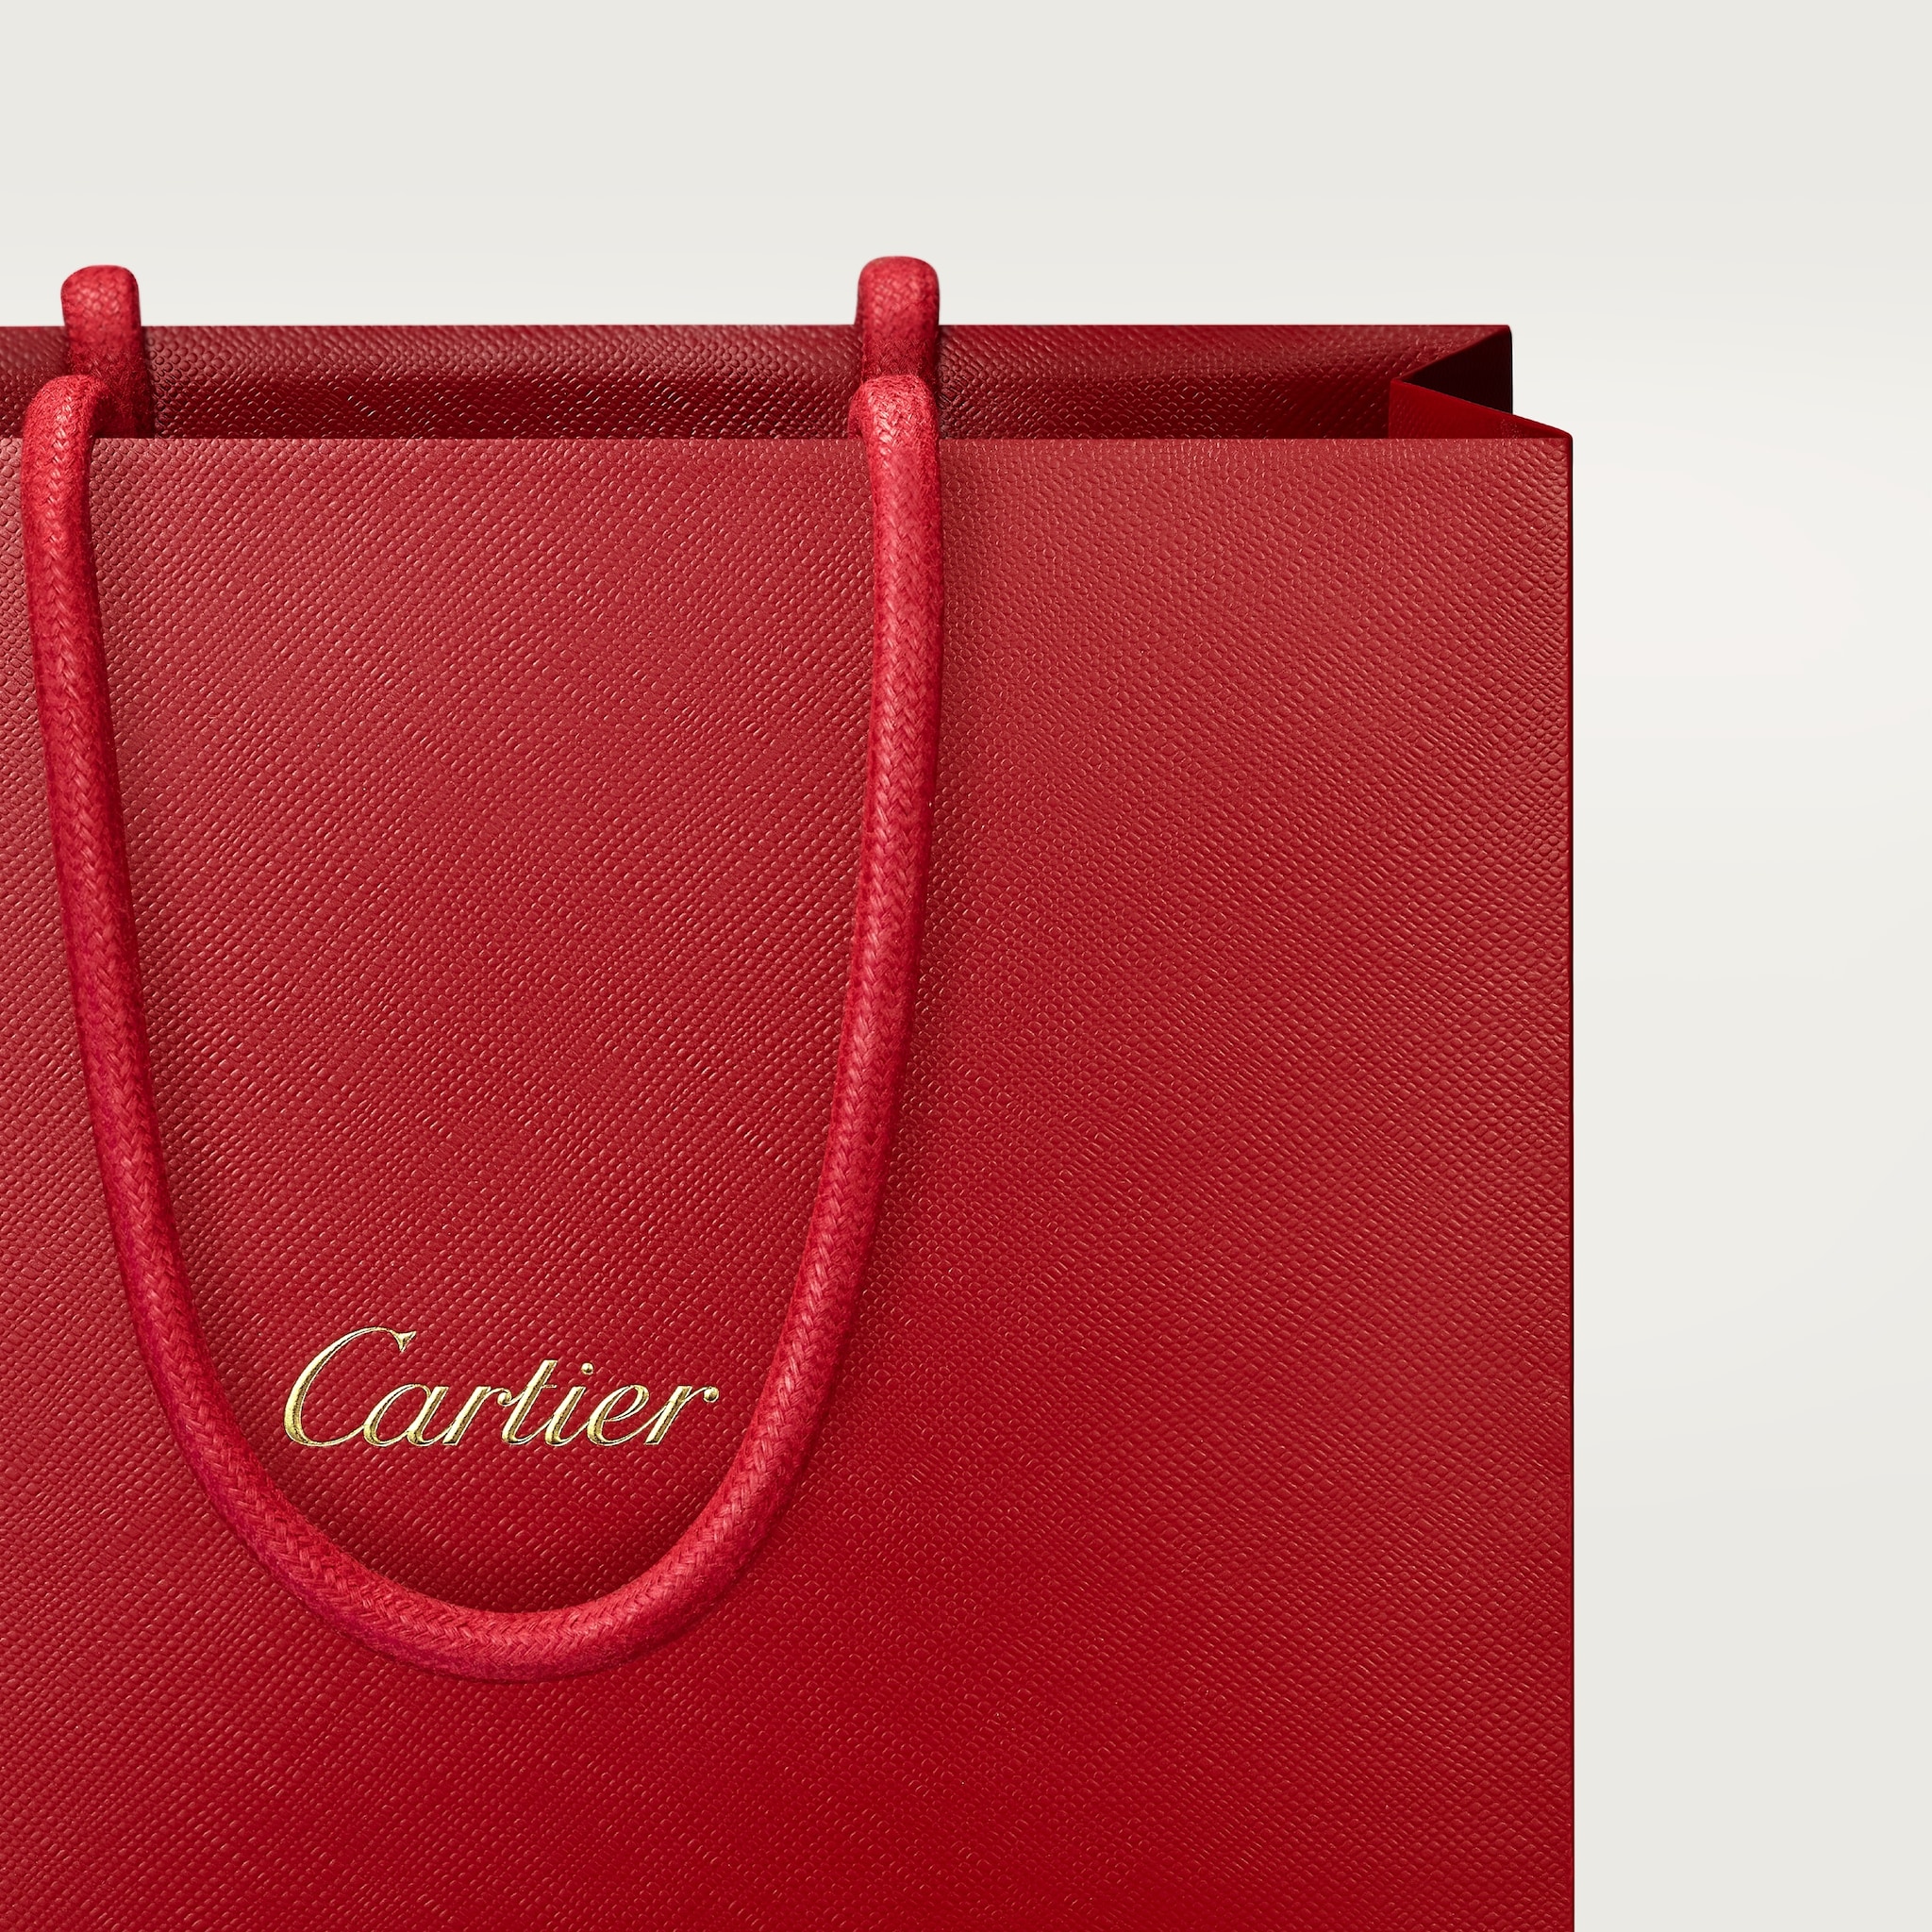 Cartier Characters沙滩巾棉质